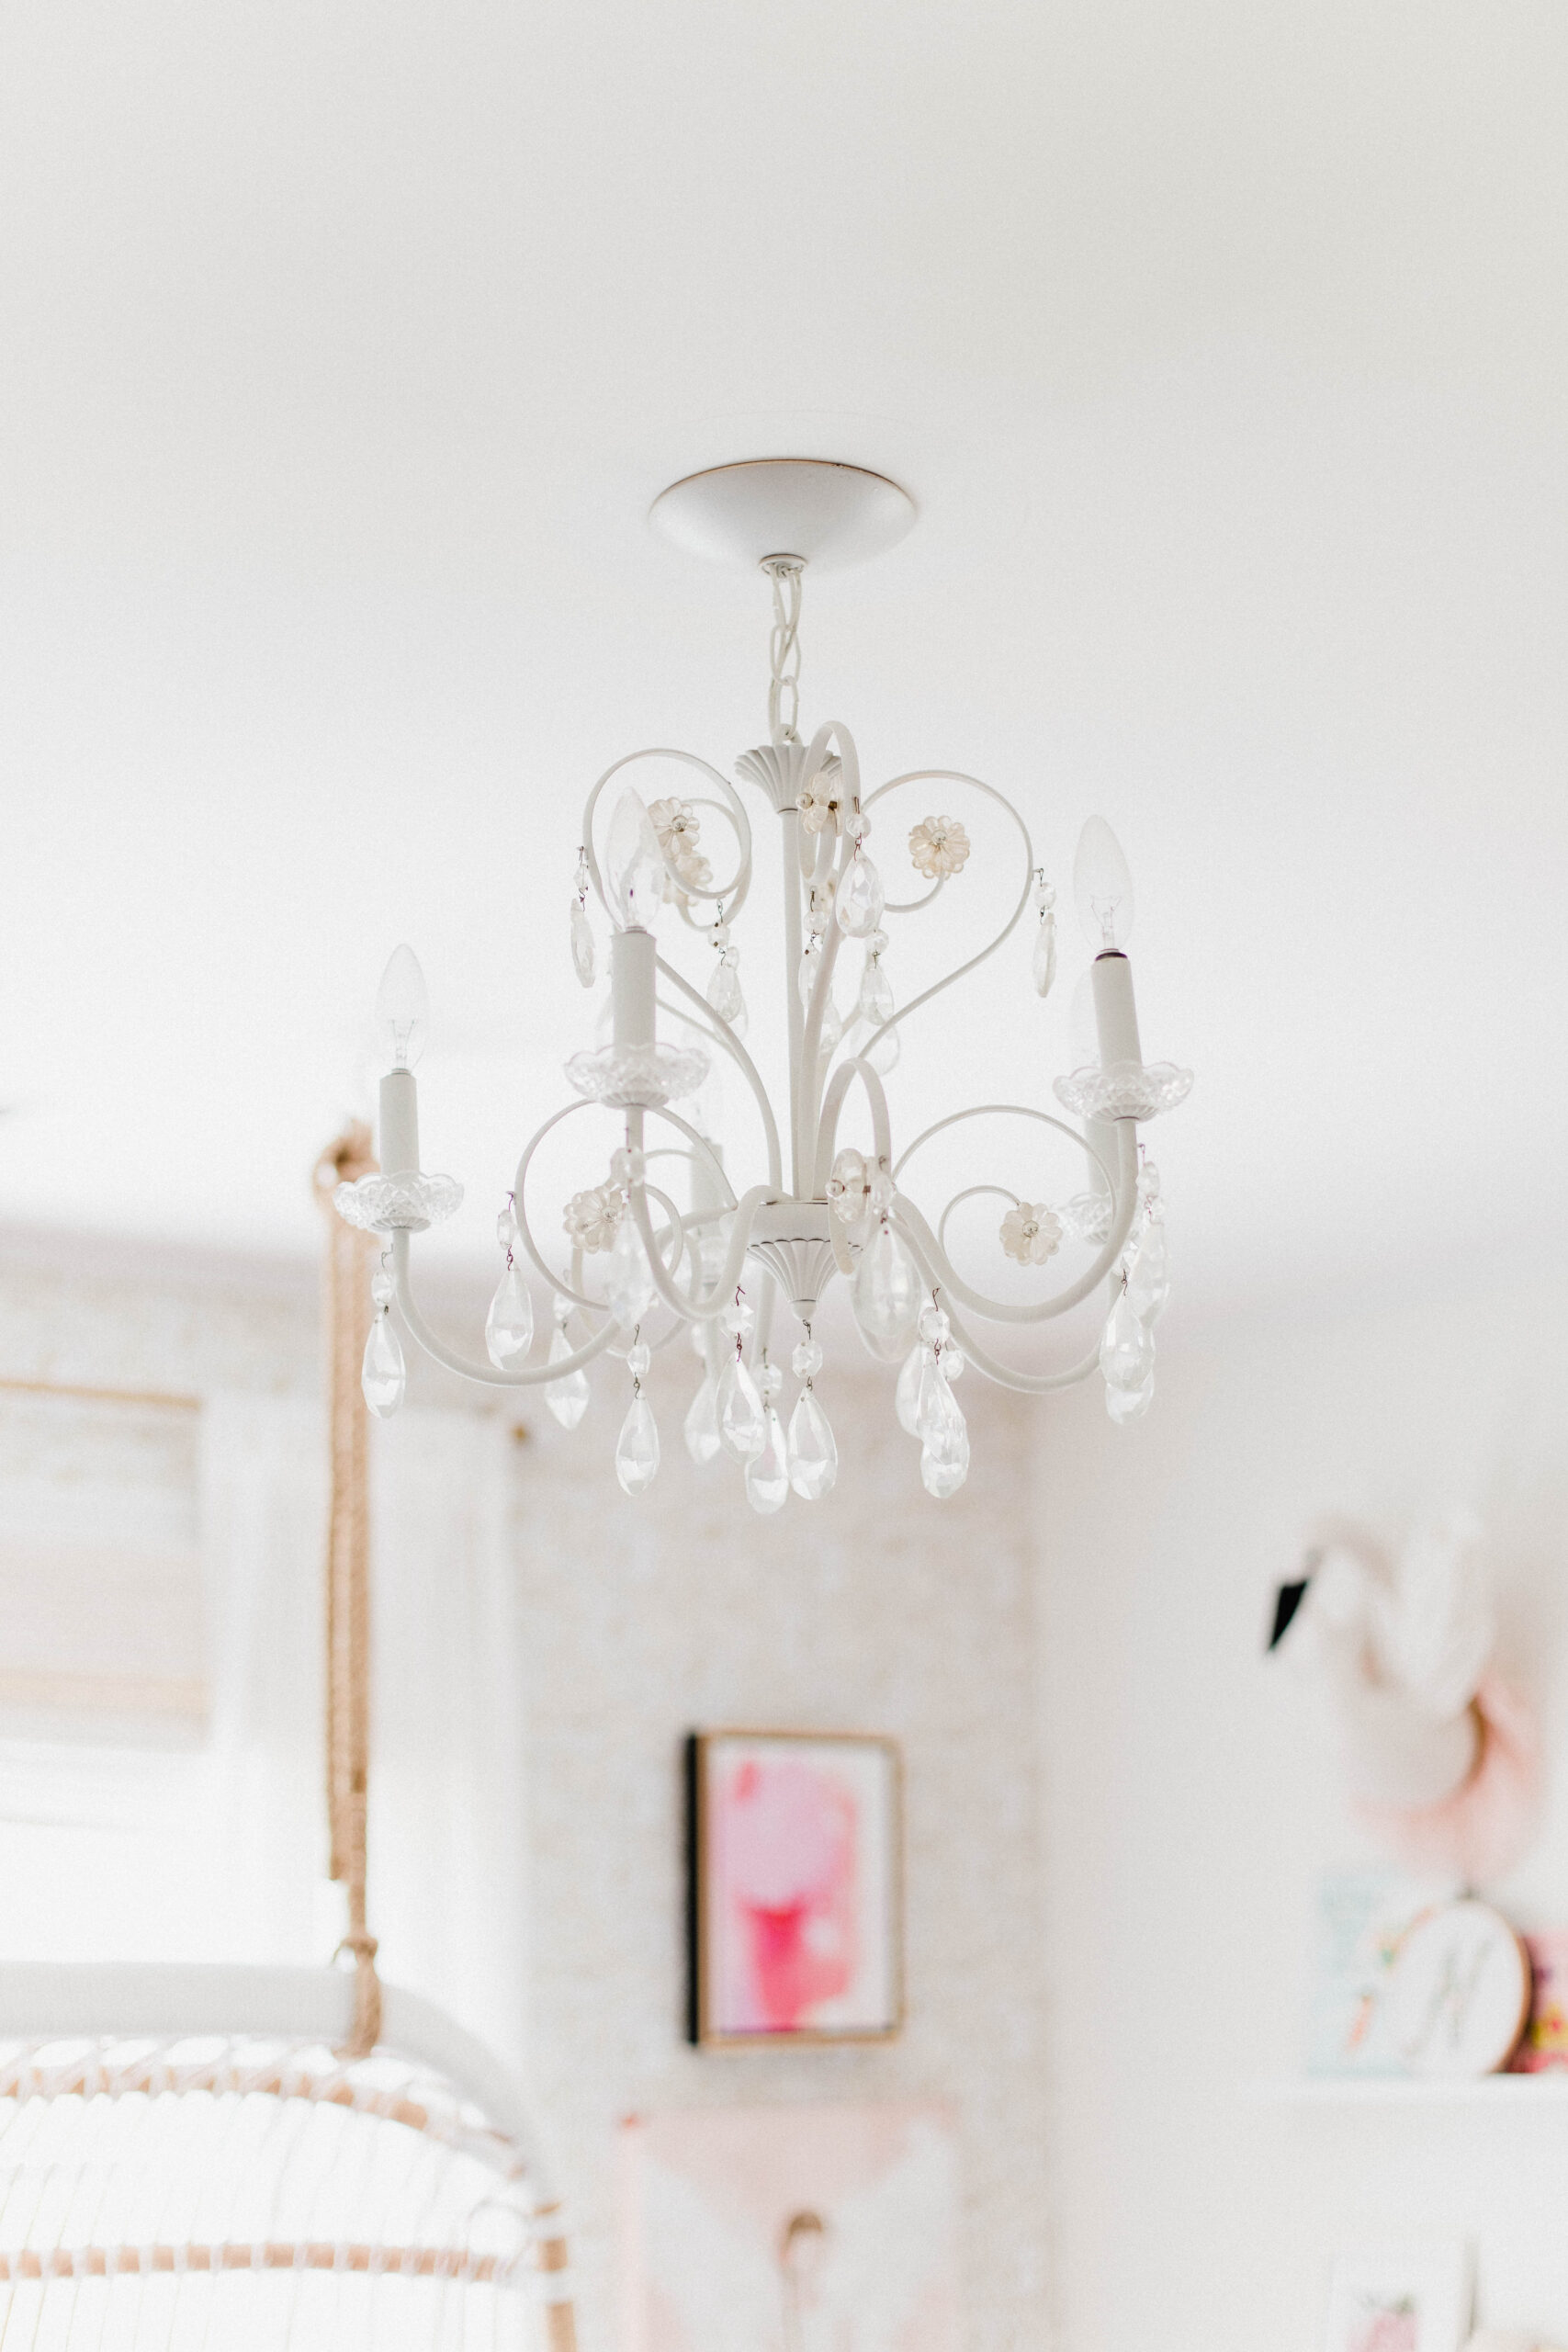 Connecticut life and style blogger Lauren McBride shares her daughter's bedroom - a fun, girly, and sophisticated space for a growing little girl. 